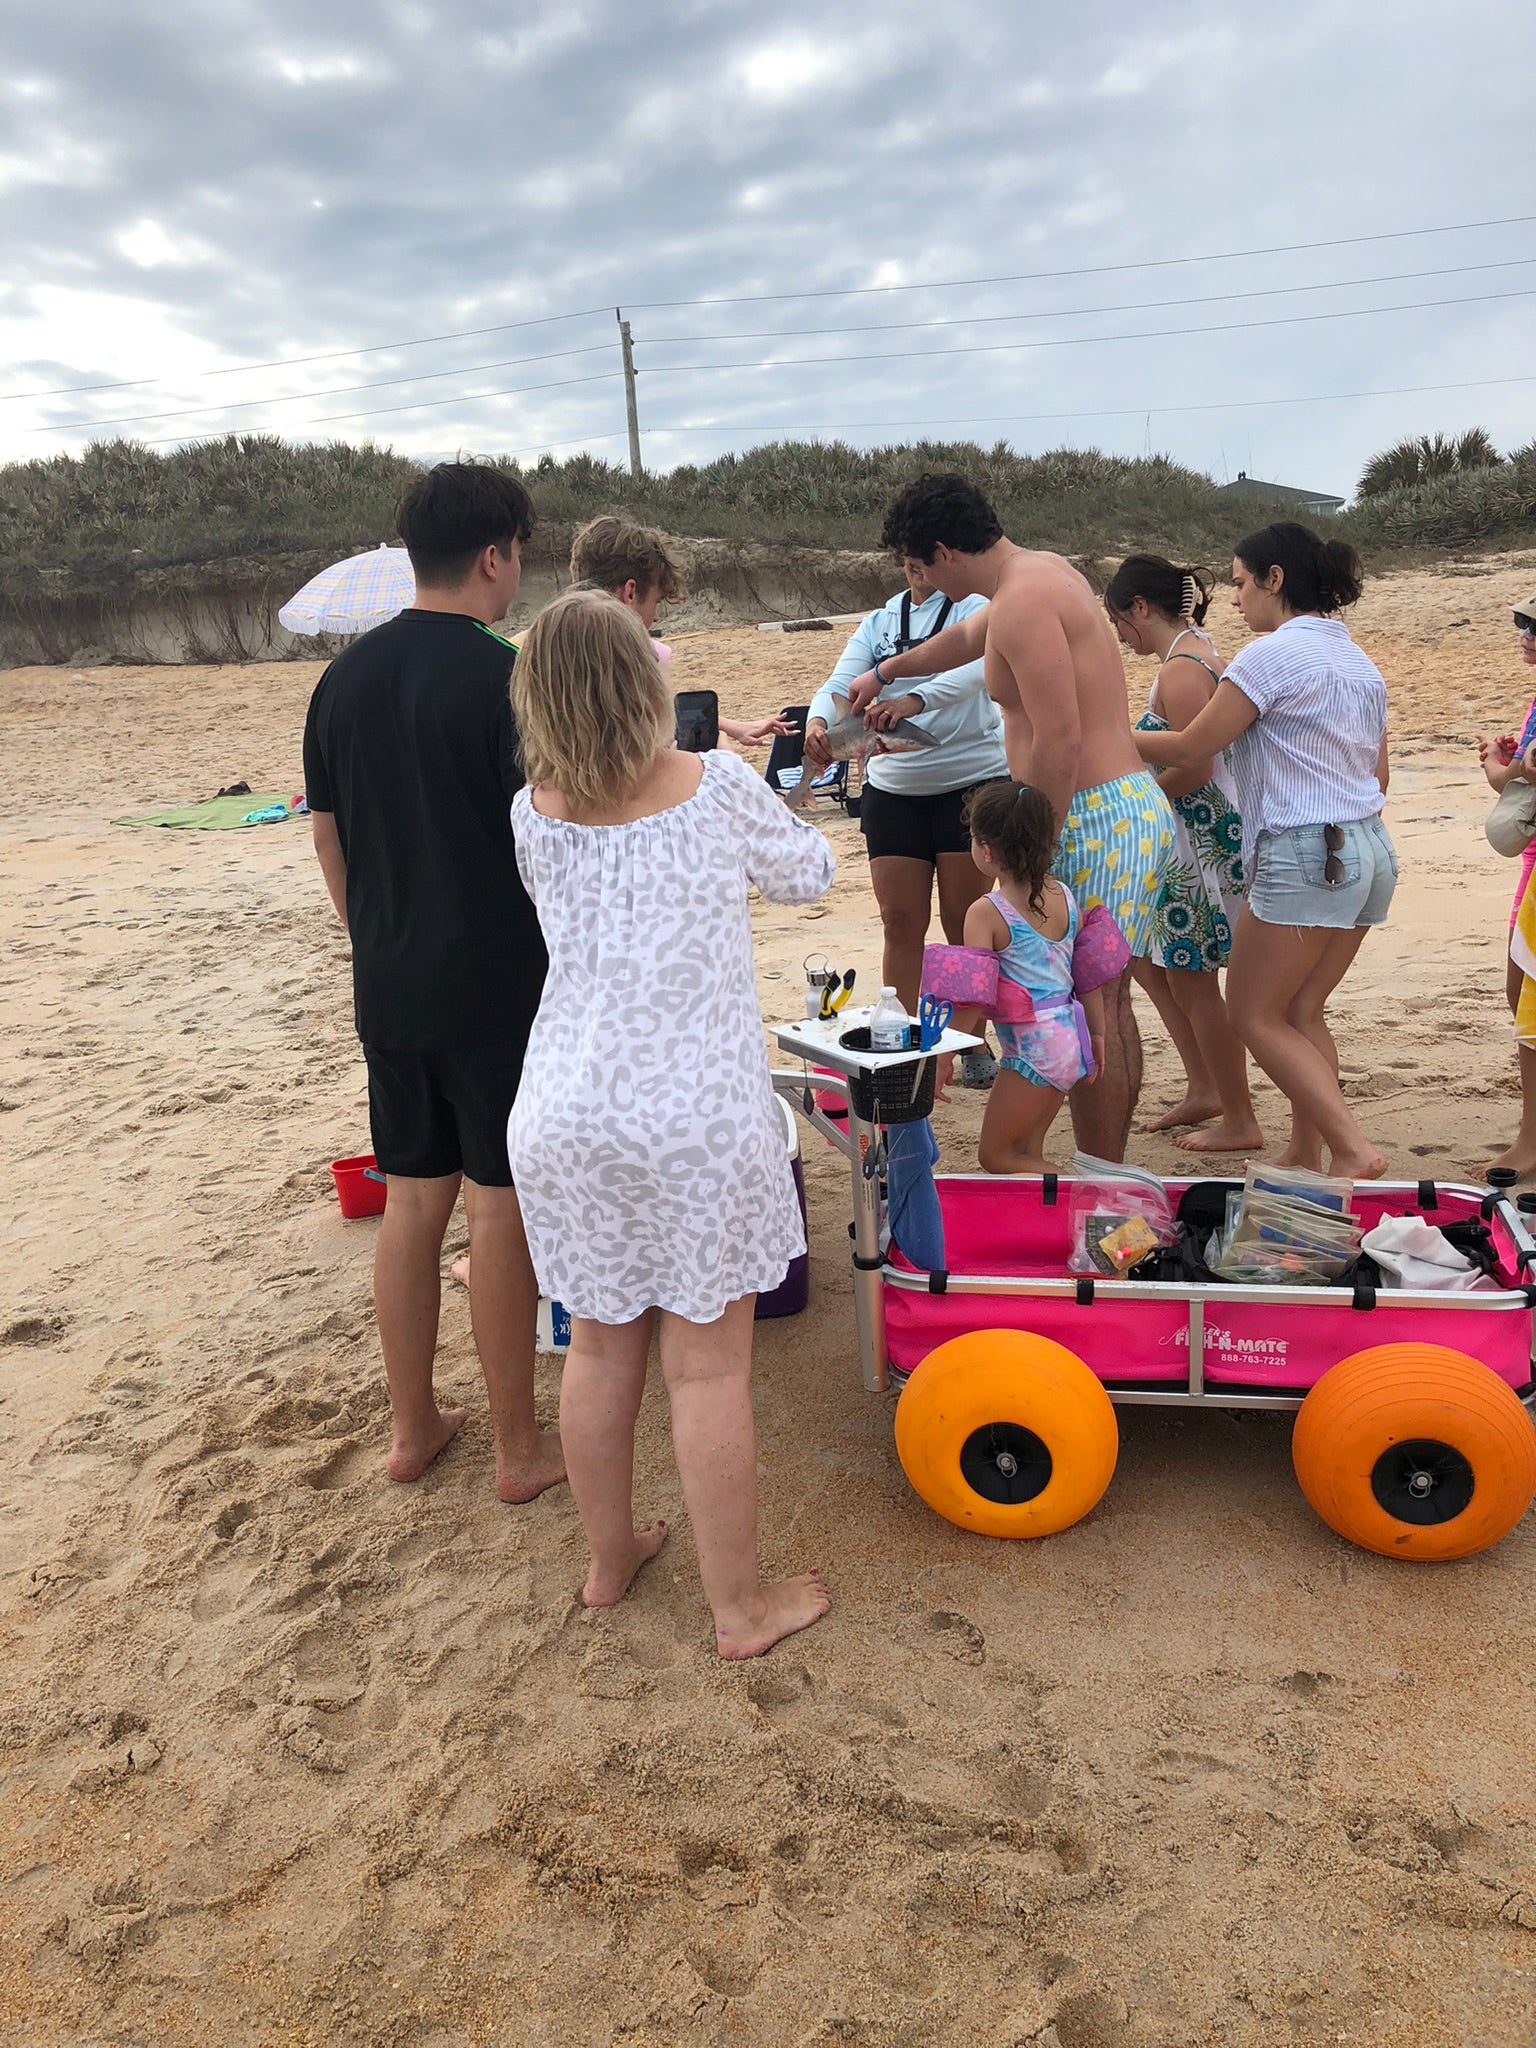 Cathy Sanders holds a bonnethead shark while several beachgoers touch the shark's back to feel the texture. The pink Fishin' Girl cart is in the foreground.